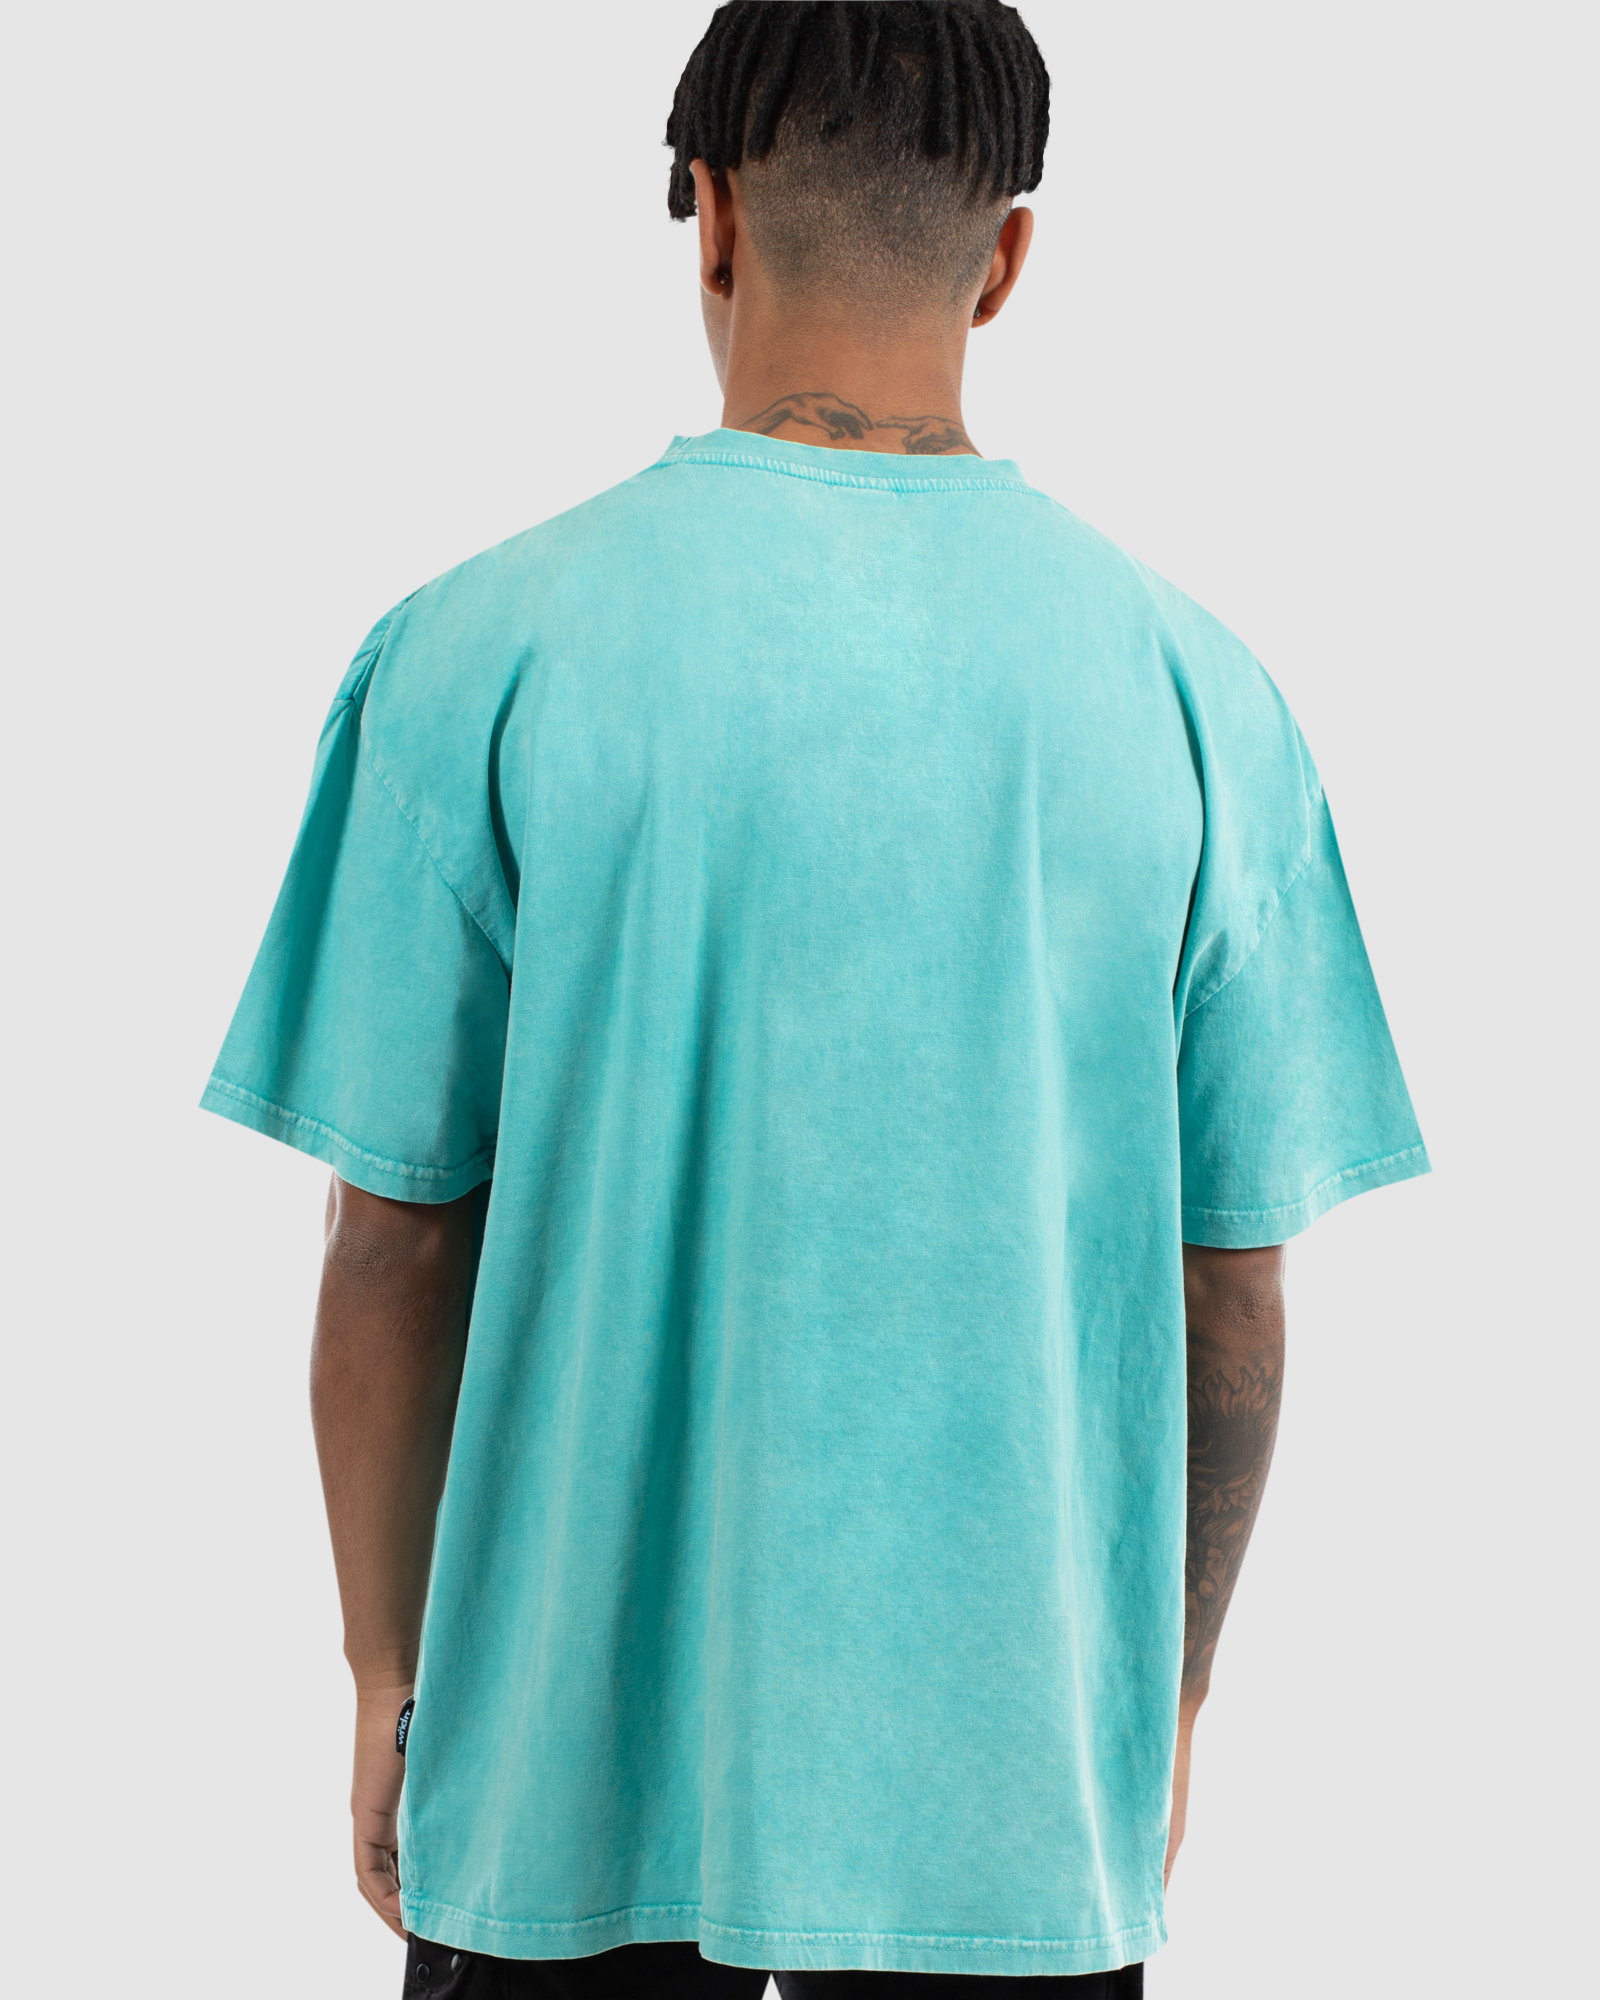 HOXTON VINTAGE FIT TEE - WASHED TEAL